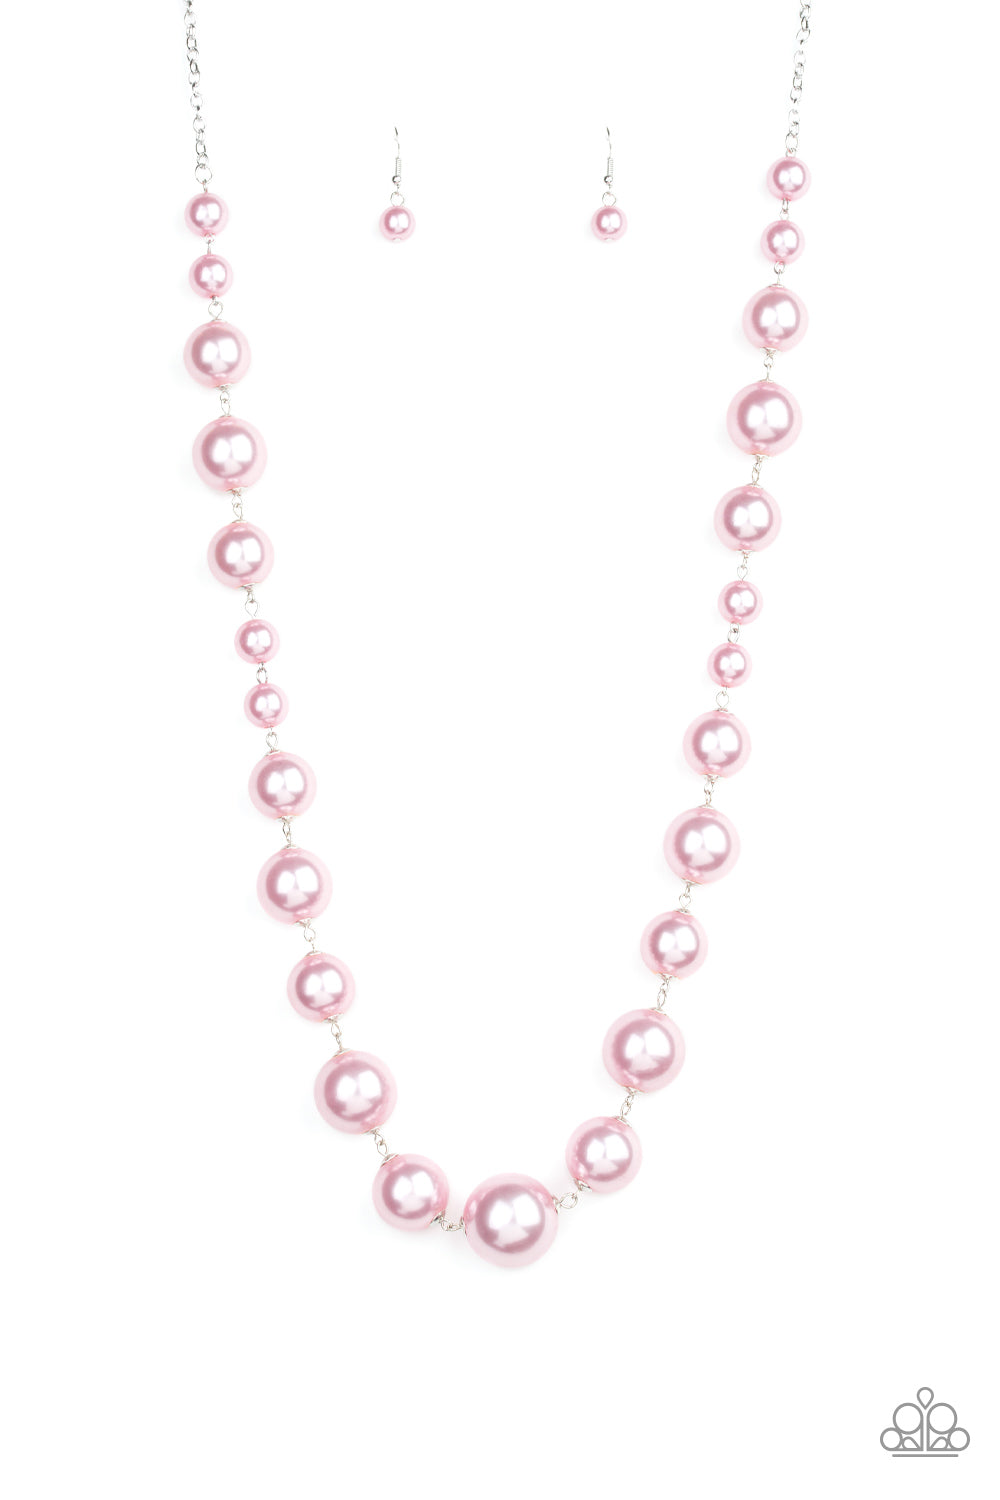 Necklace, Sensitive Skin, Hypoallergenic Jewelry, Pink, Pearls